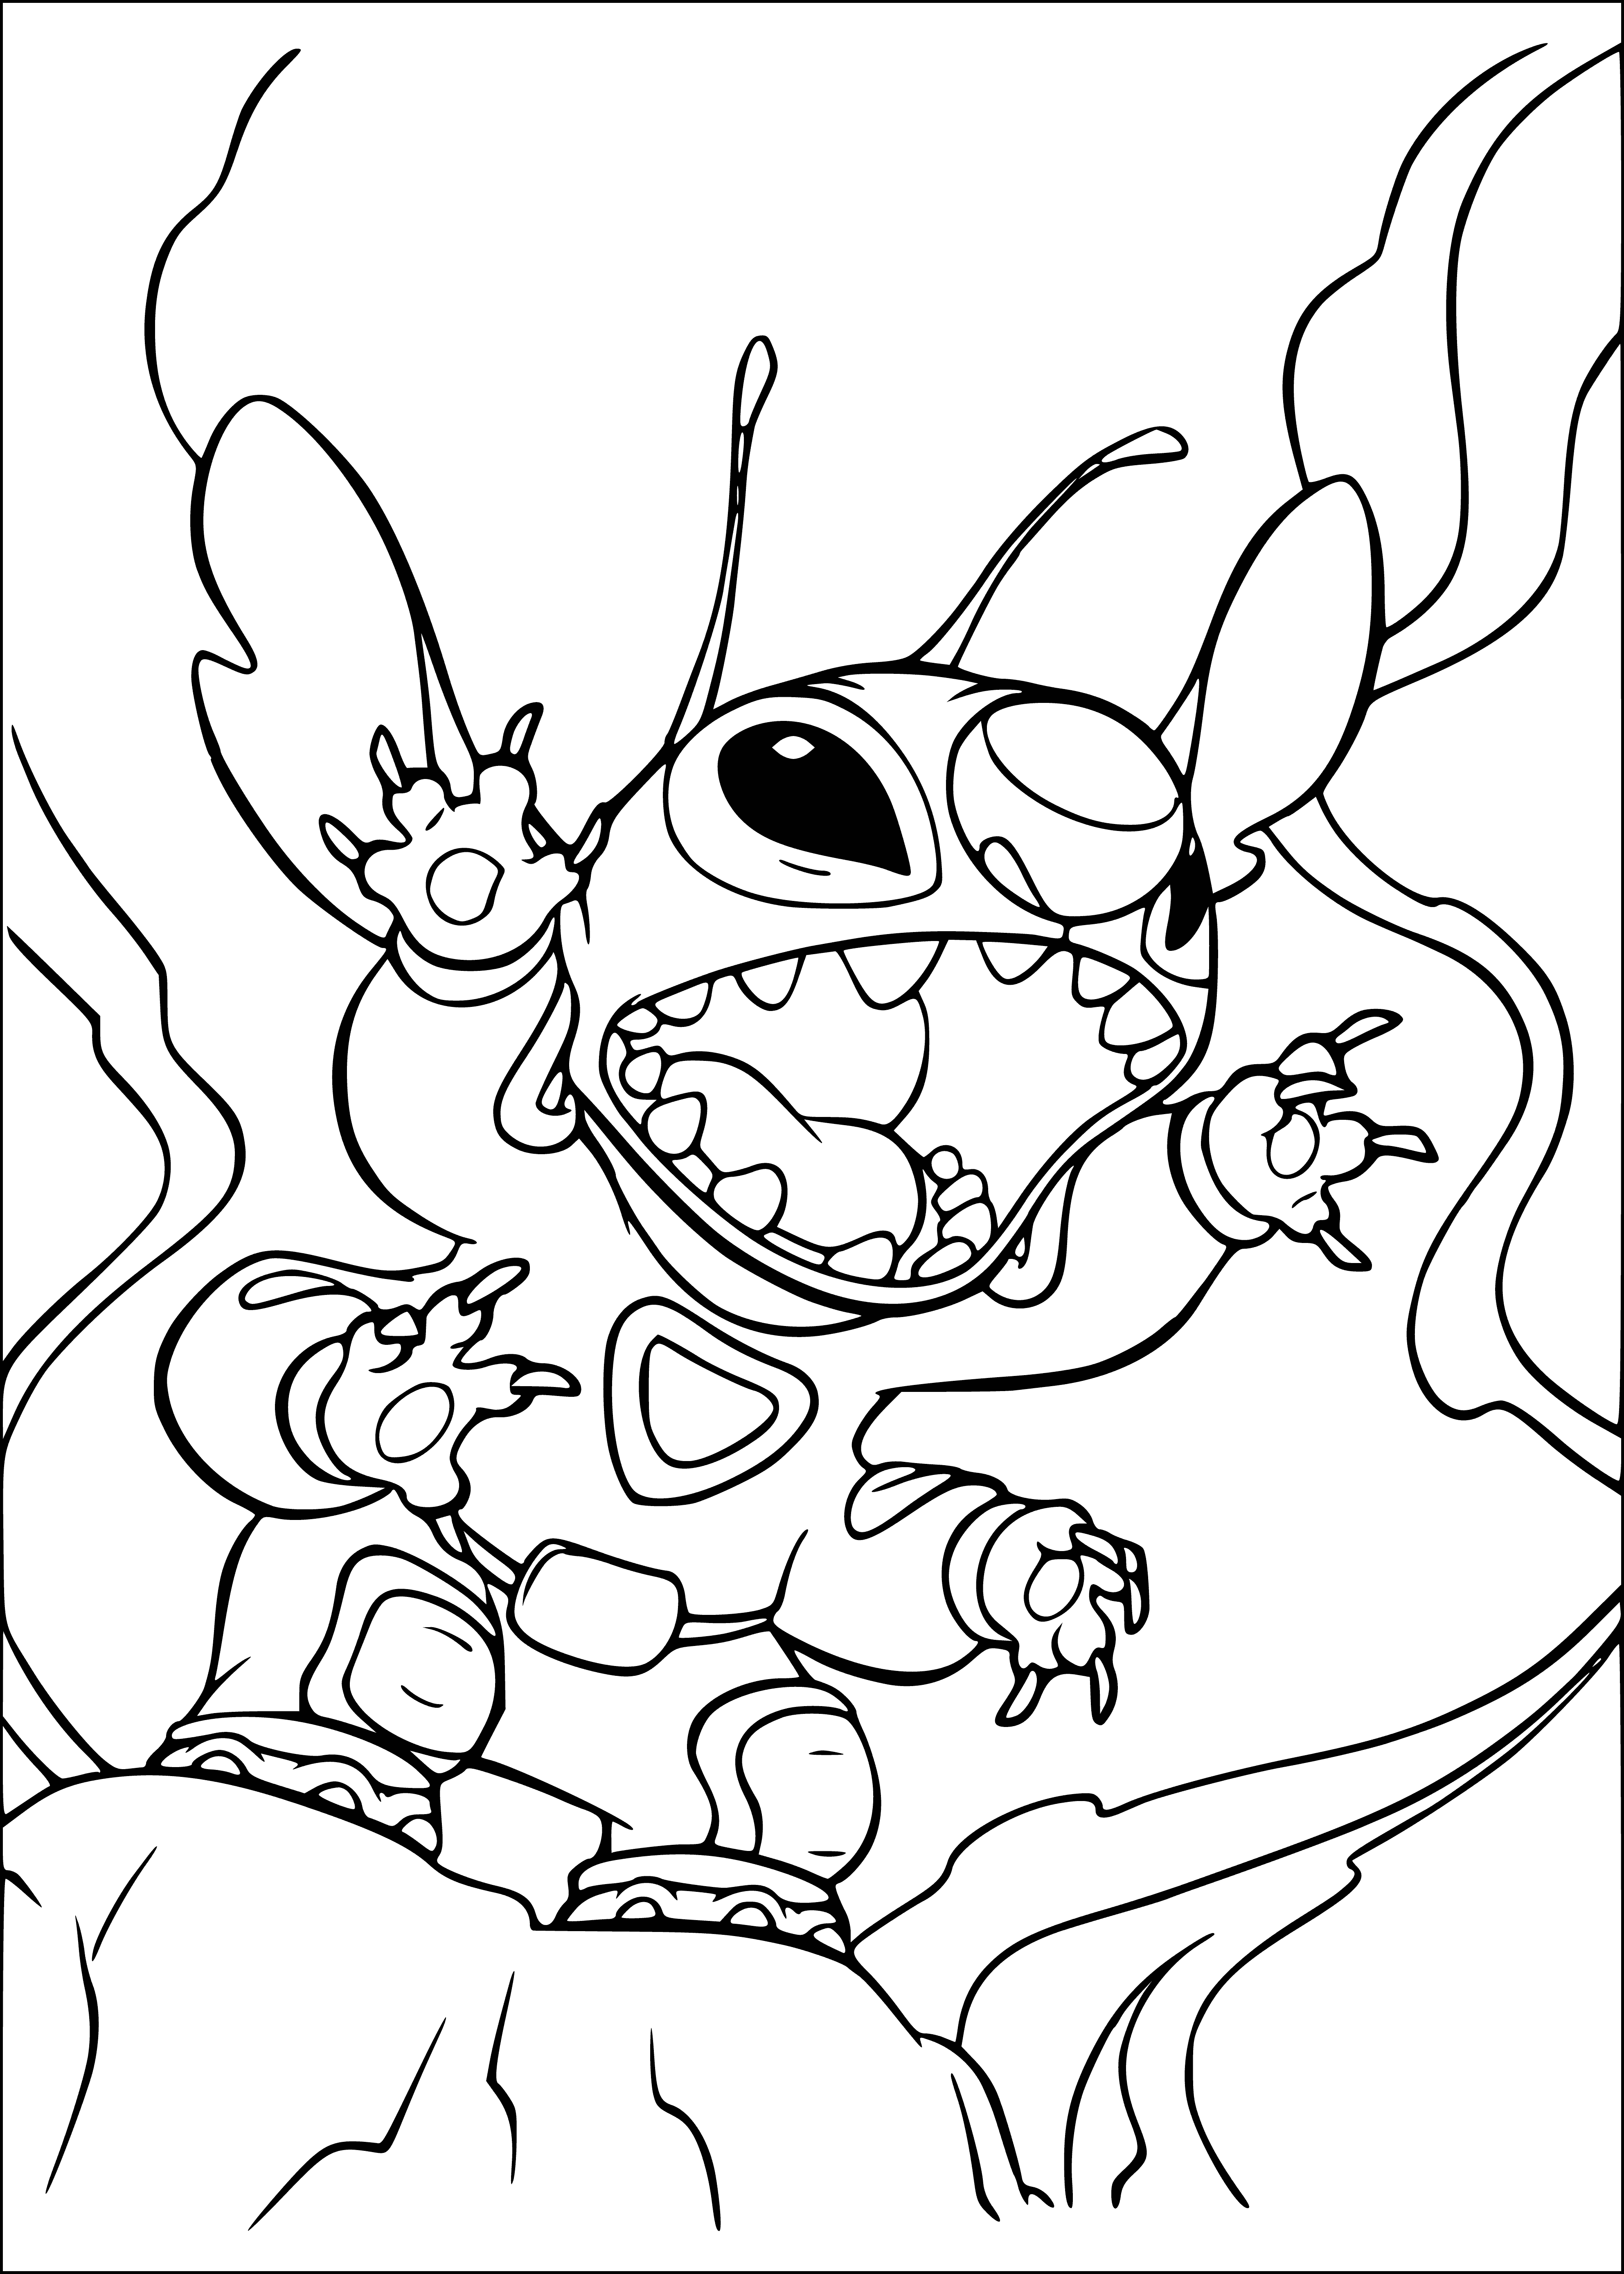 Contact coloring page